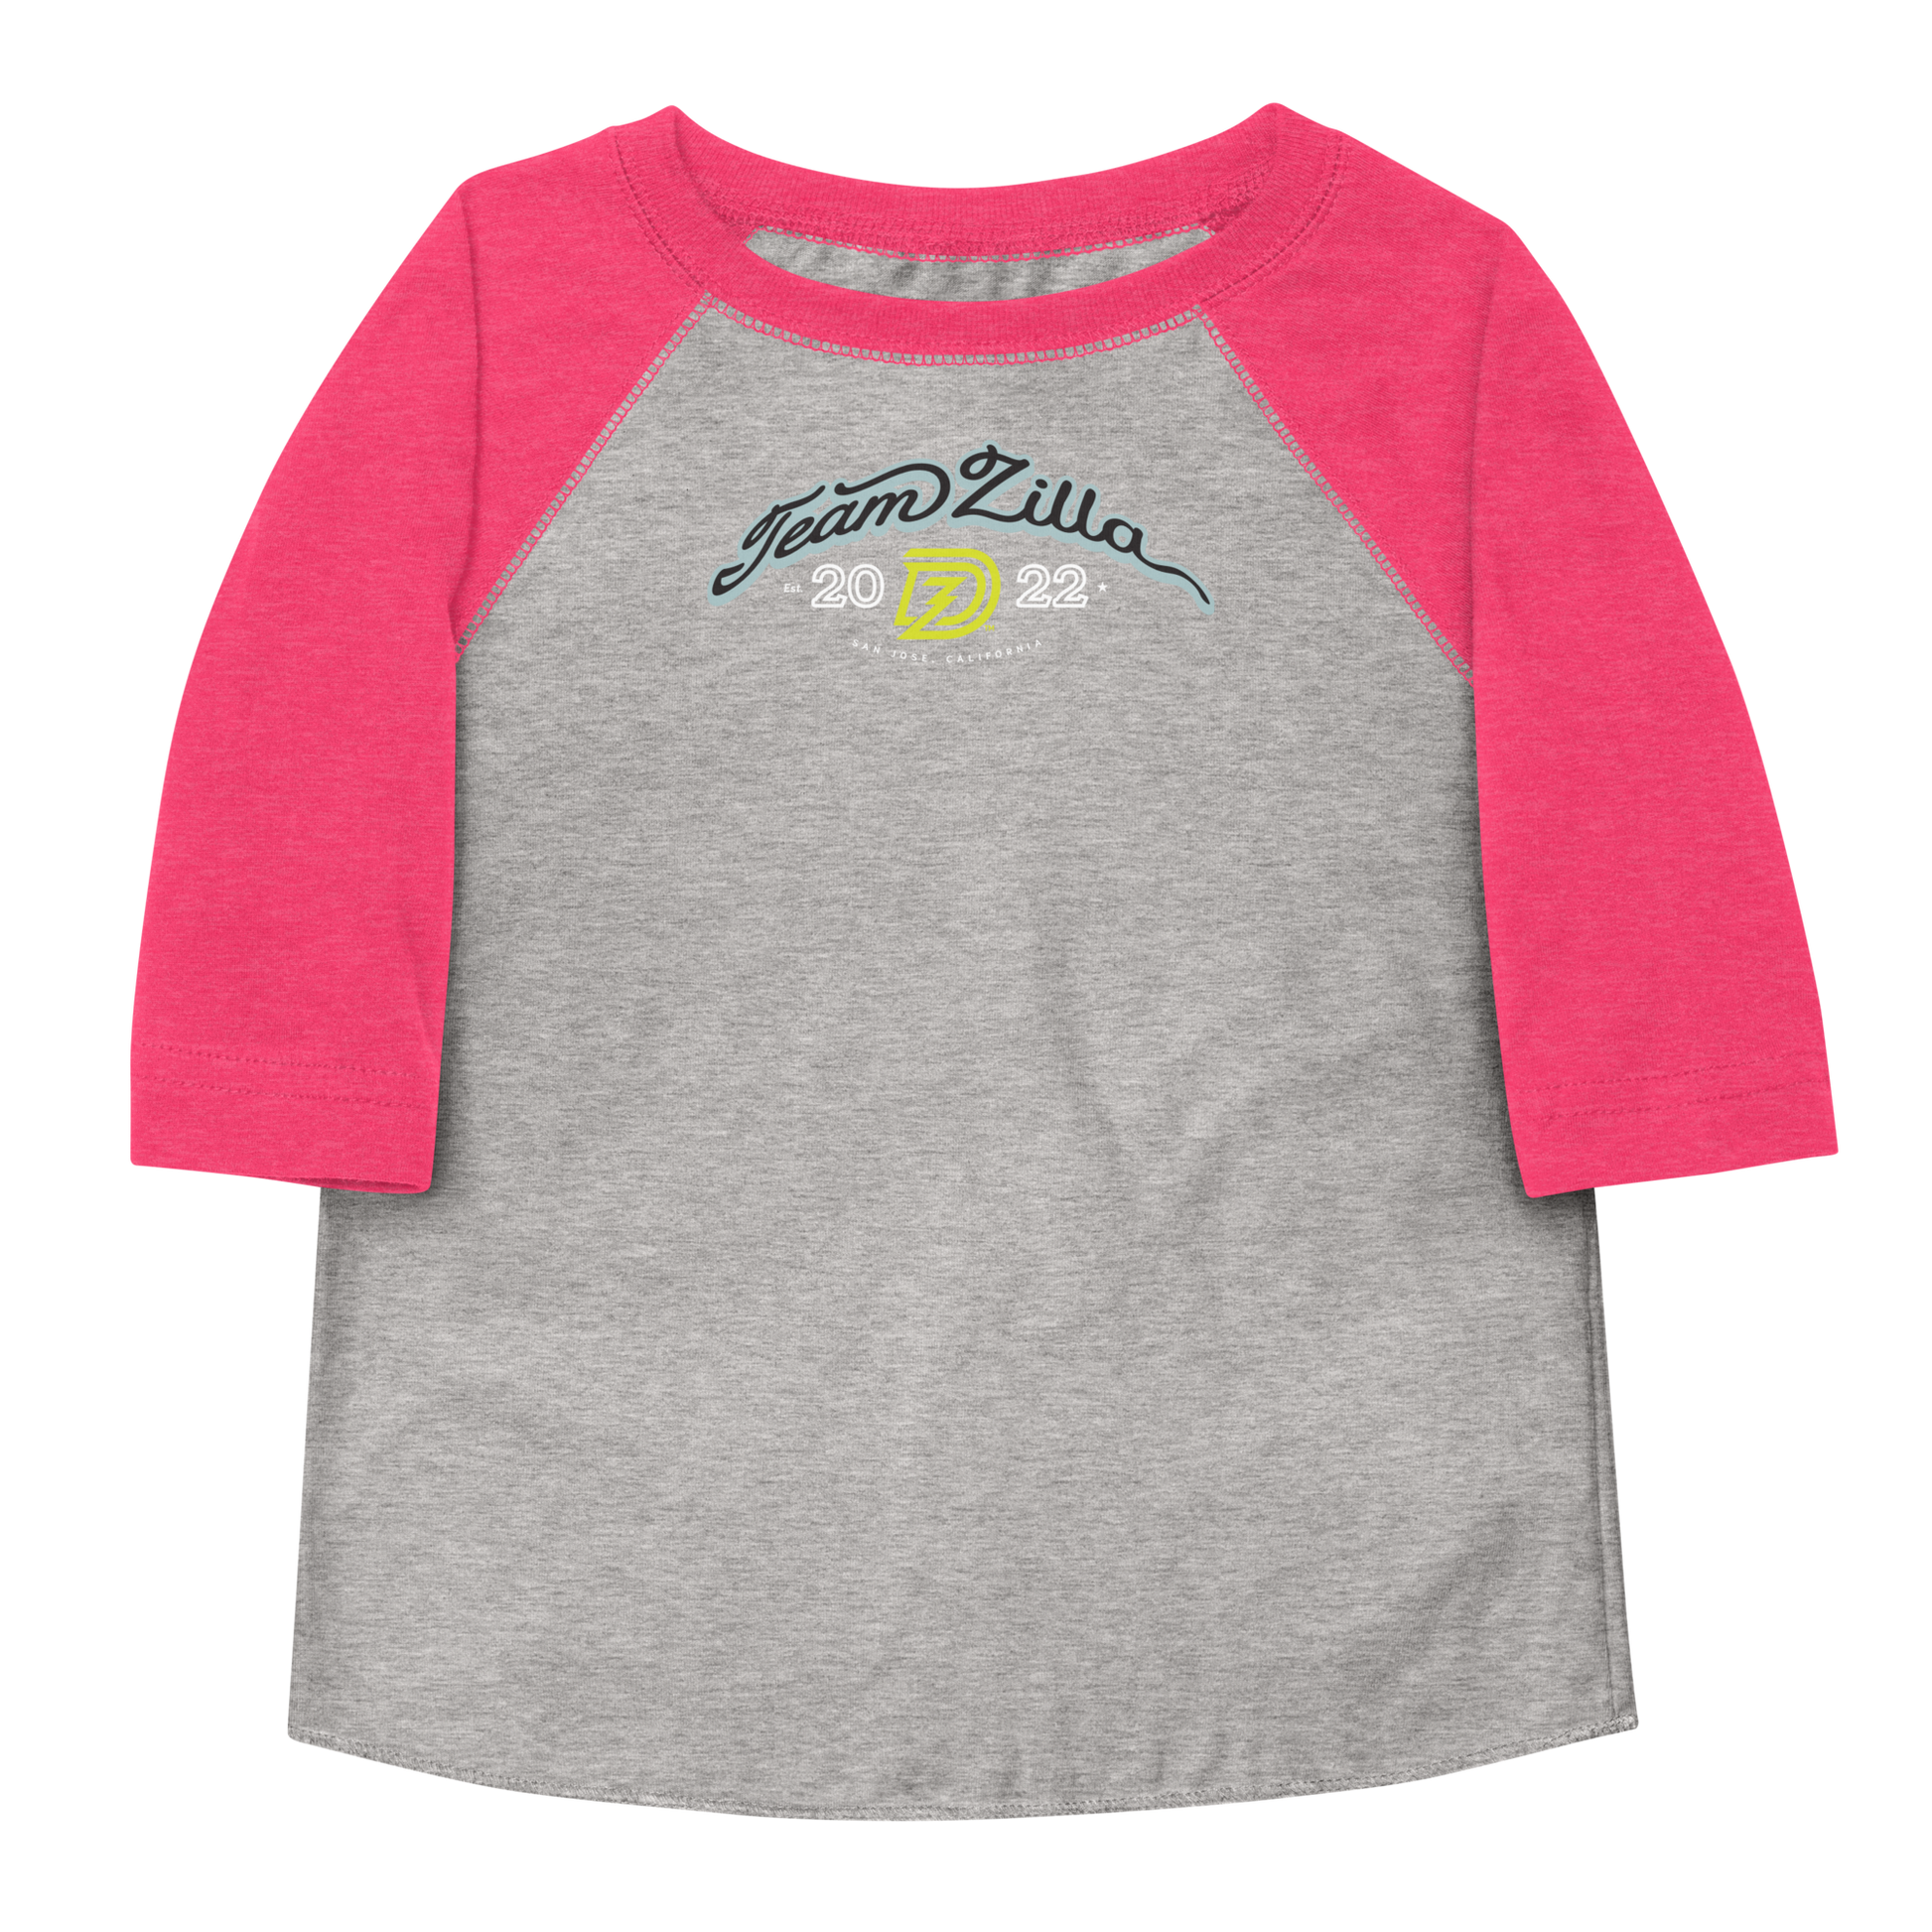 Team Zilla 2022 Toddler Shirt in Vintage Heather with Vintage Hot Pink Sleeves